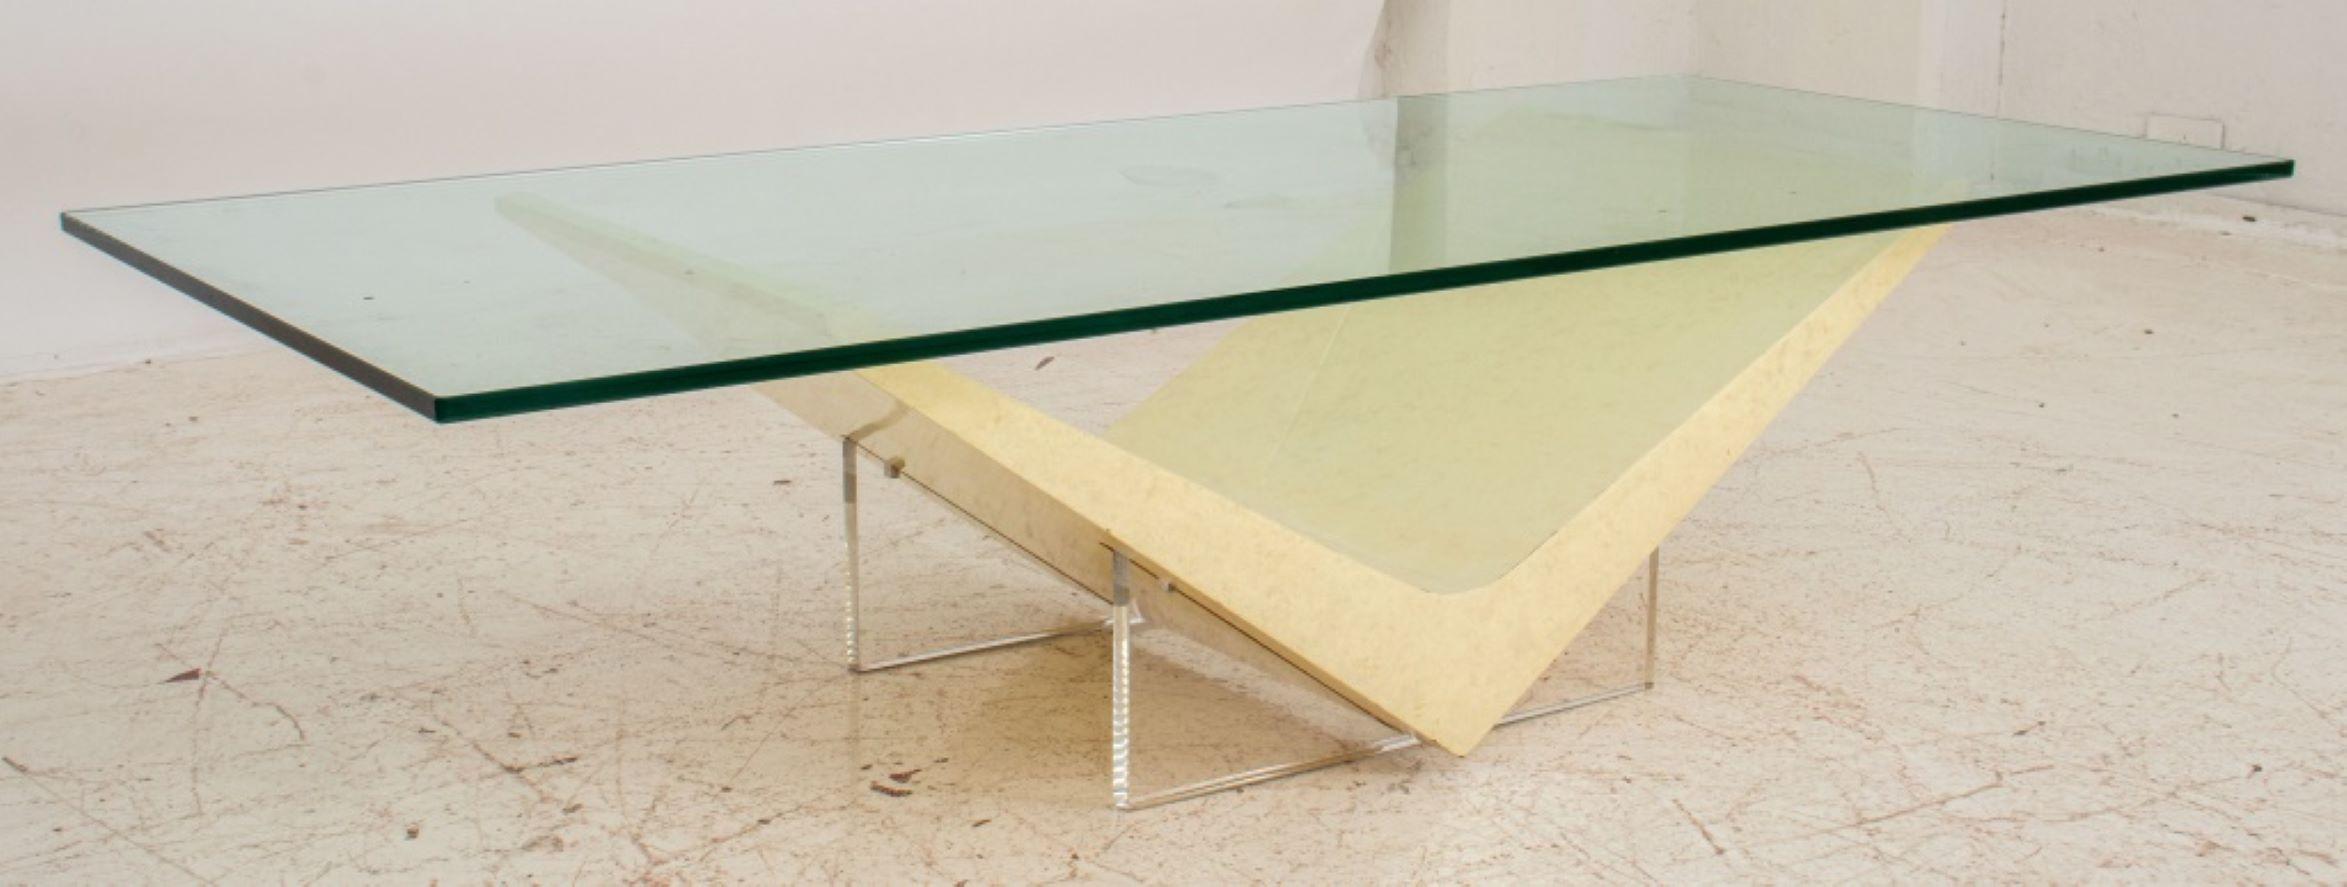 20th Century Gampel-Stoll Faux Parchment Coffee Table, 1980s For Sale